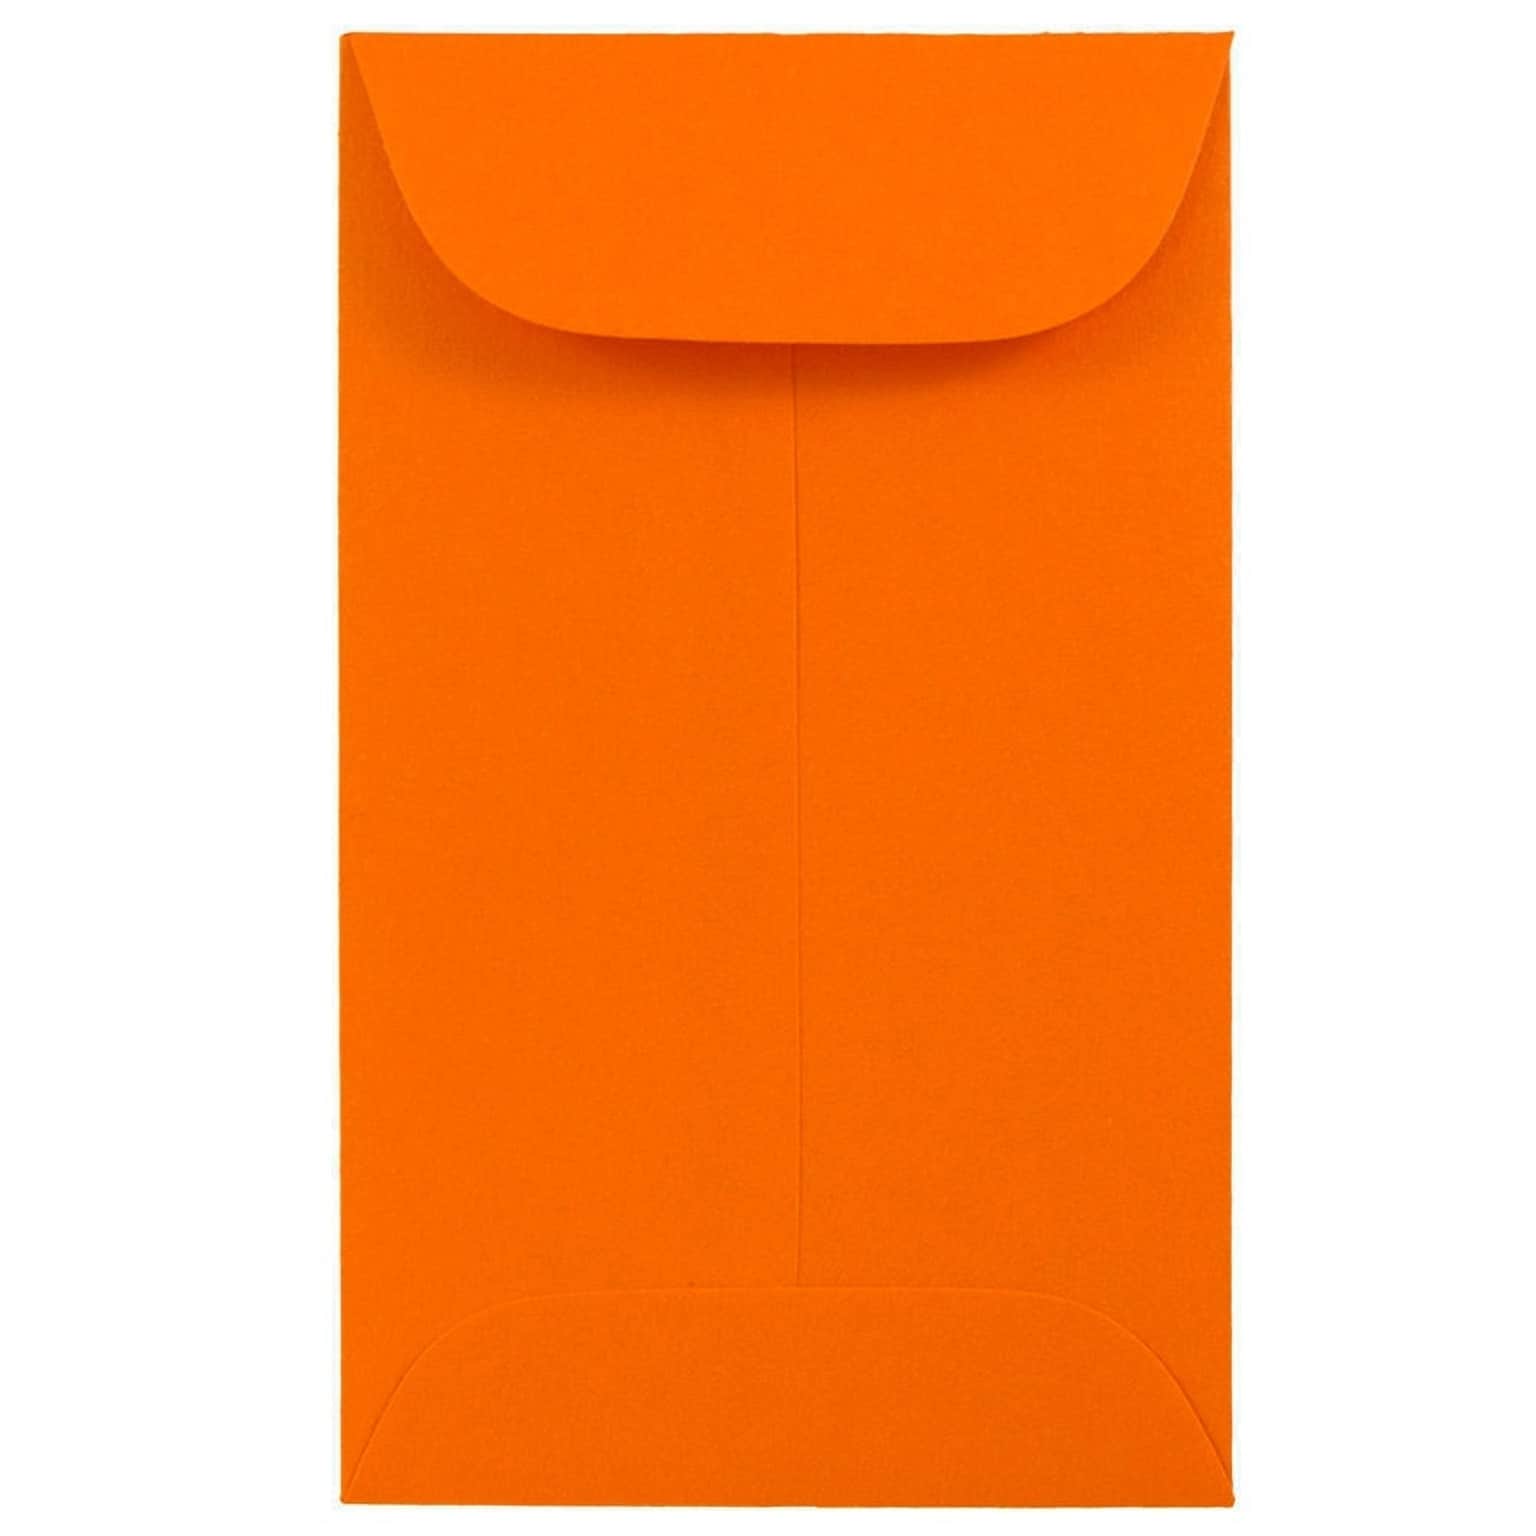 JAM PAPER #3 Coin Business Colored Envelopes, 2 1/2 x 4 1/4, Orange Recycled, 100/Pack (900967818A)